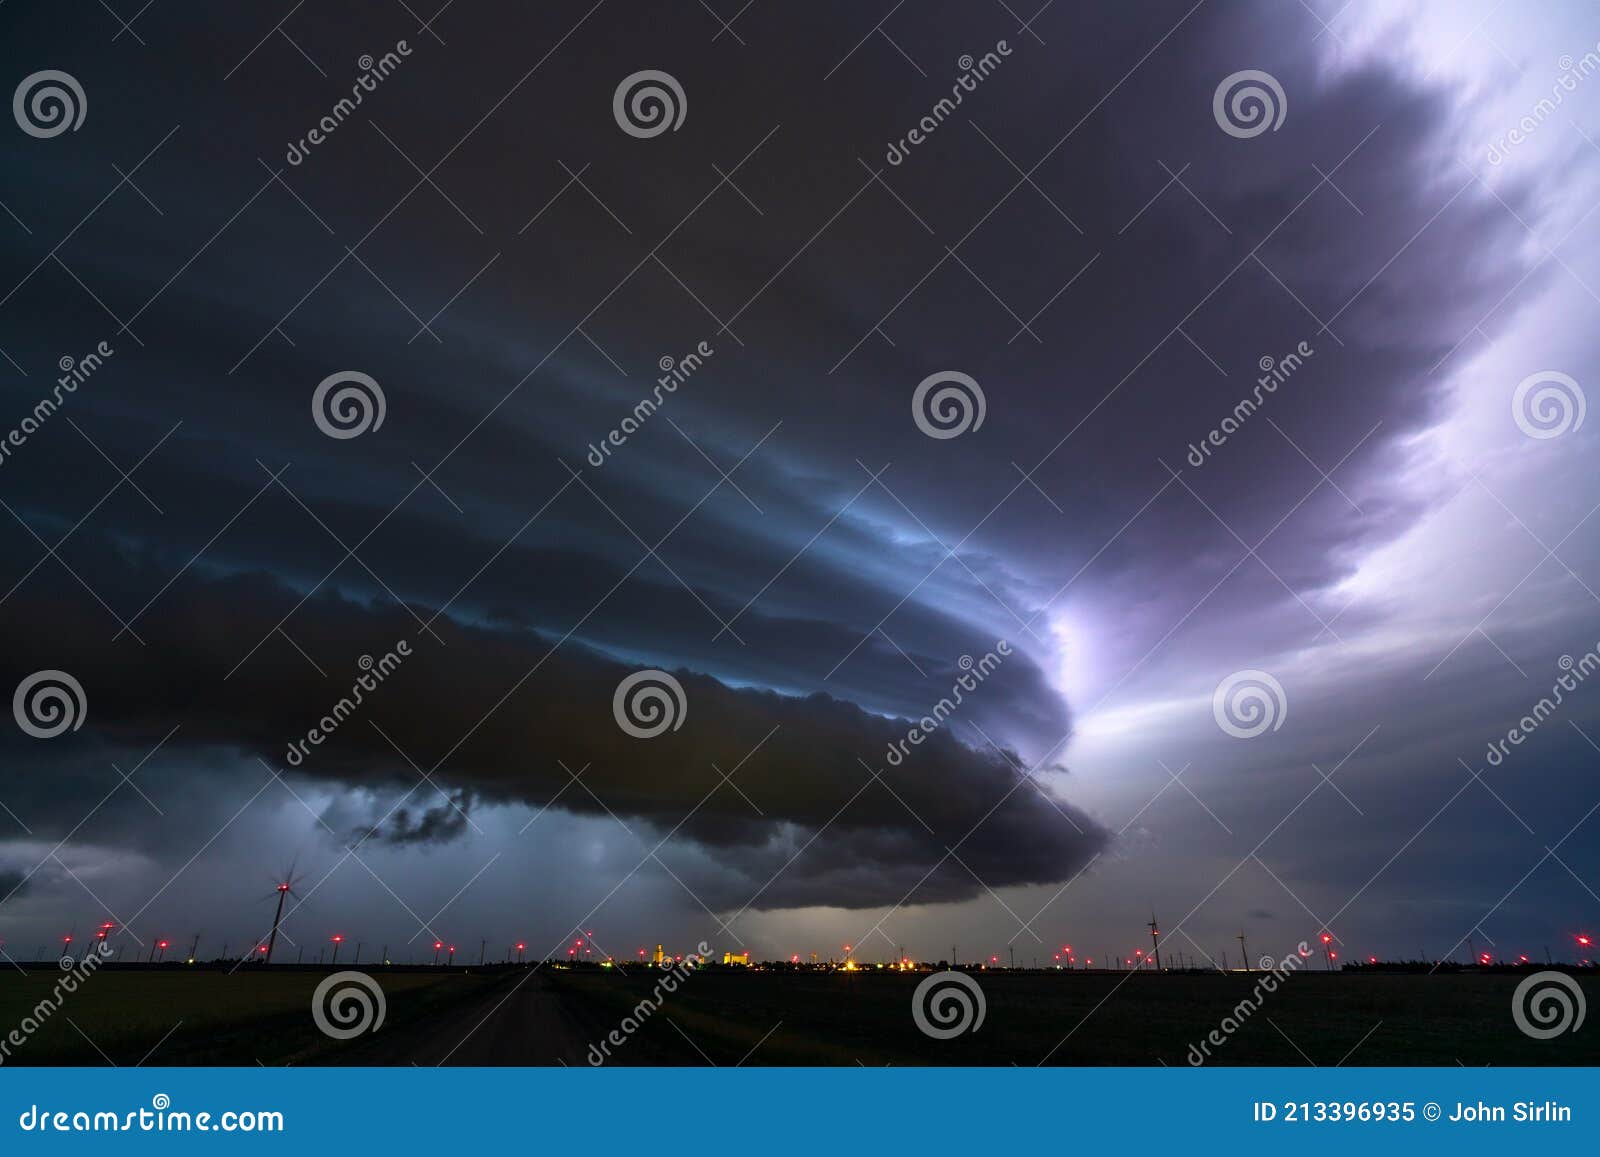 supercell thunderstorm and extreme weather